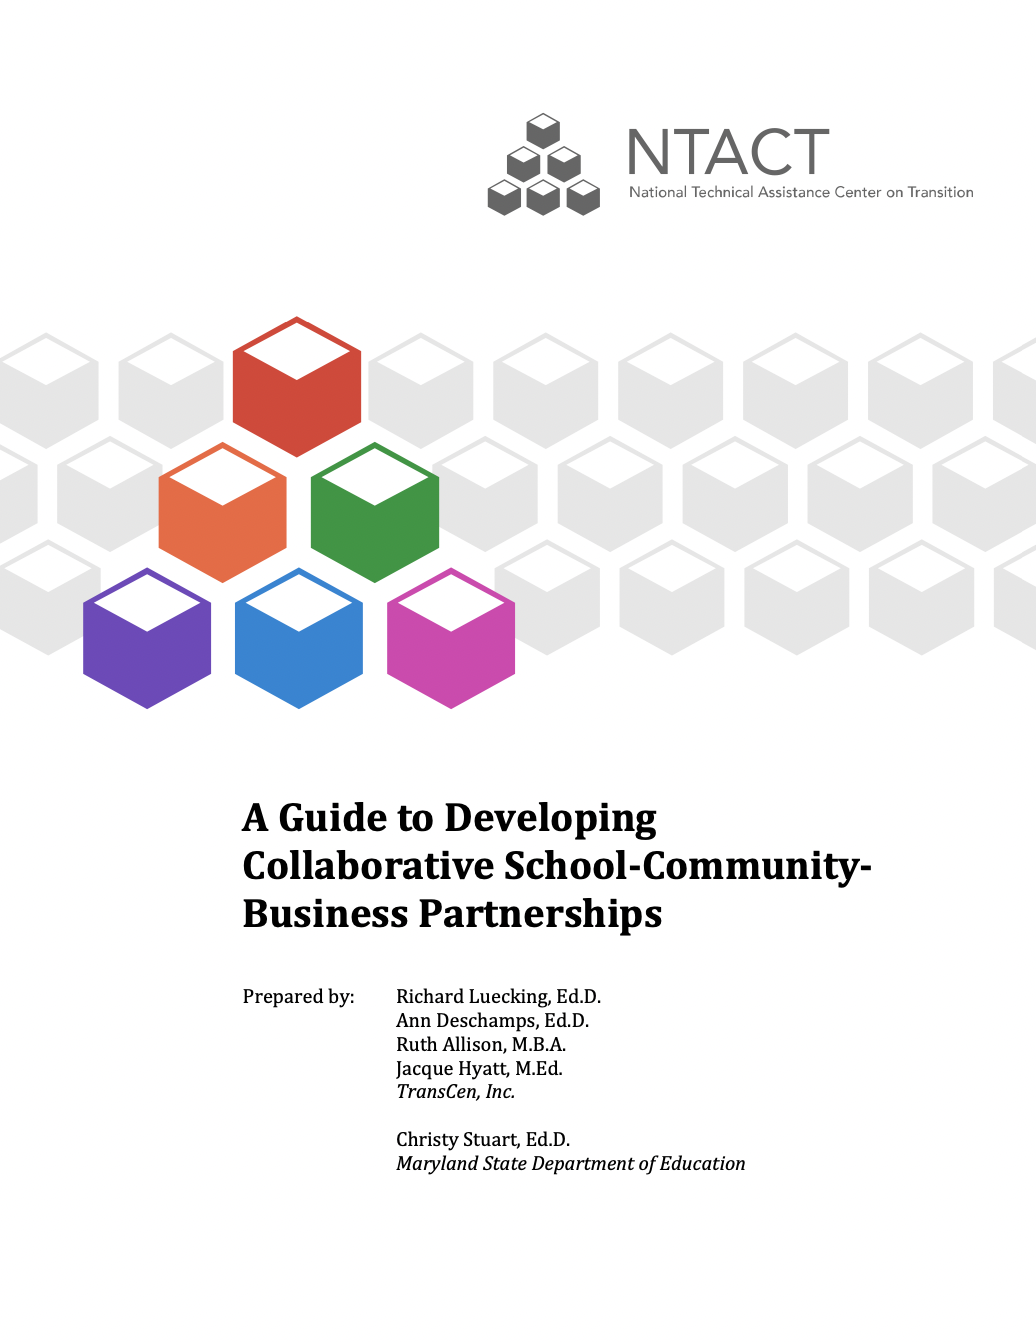 A Guide to Developing Collaborative School-Community-Business Partnerships